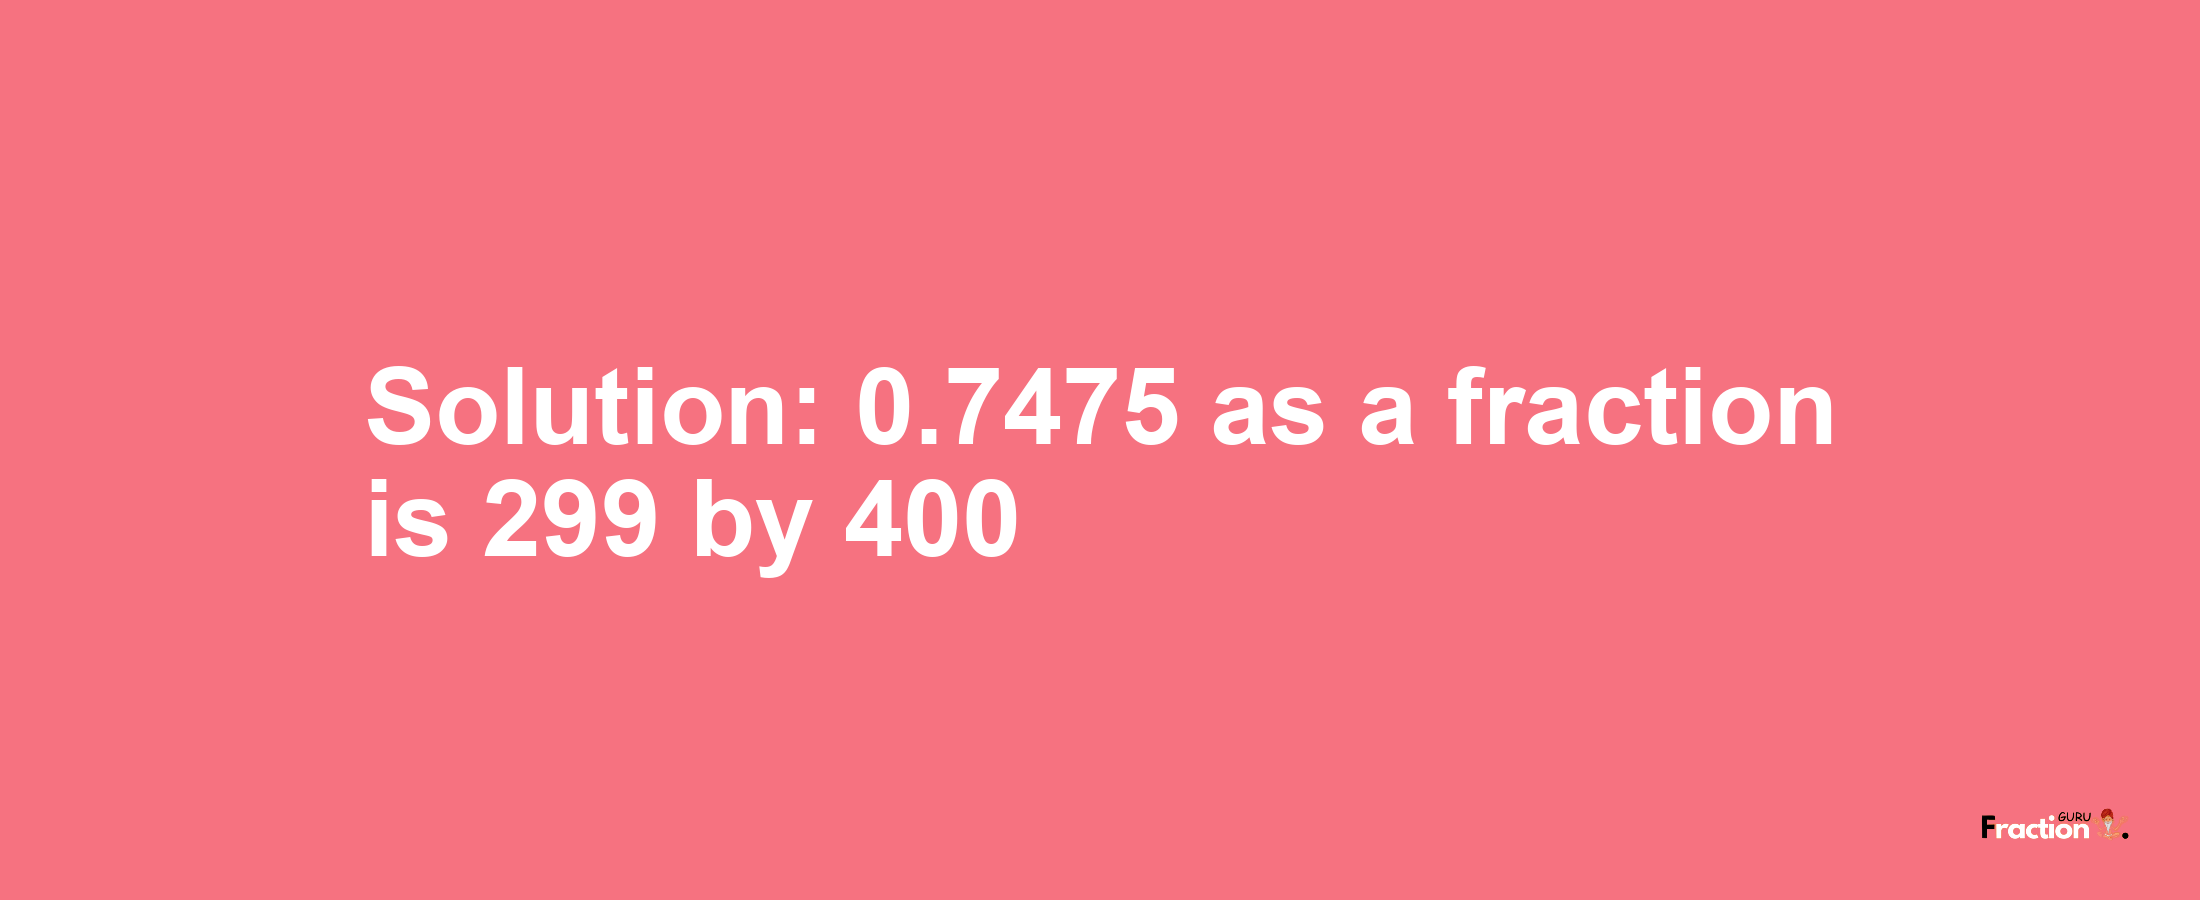 Solution:0.7475 as a fraction is 299/400